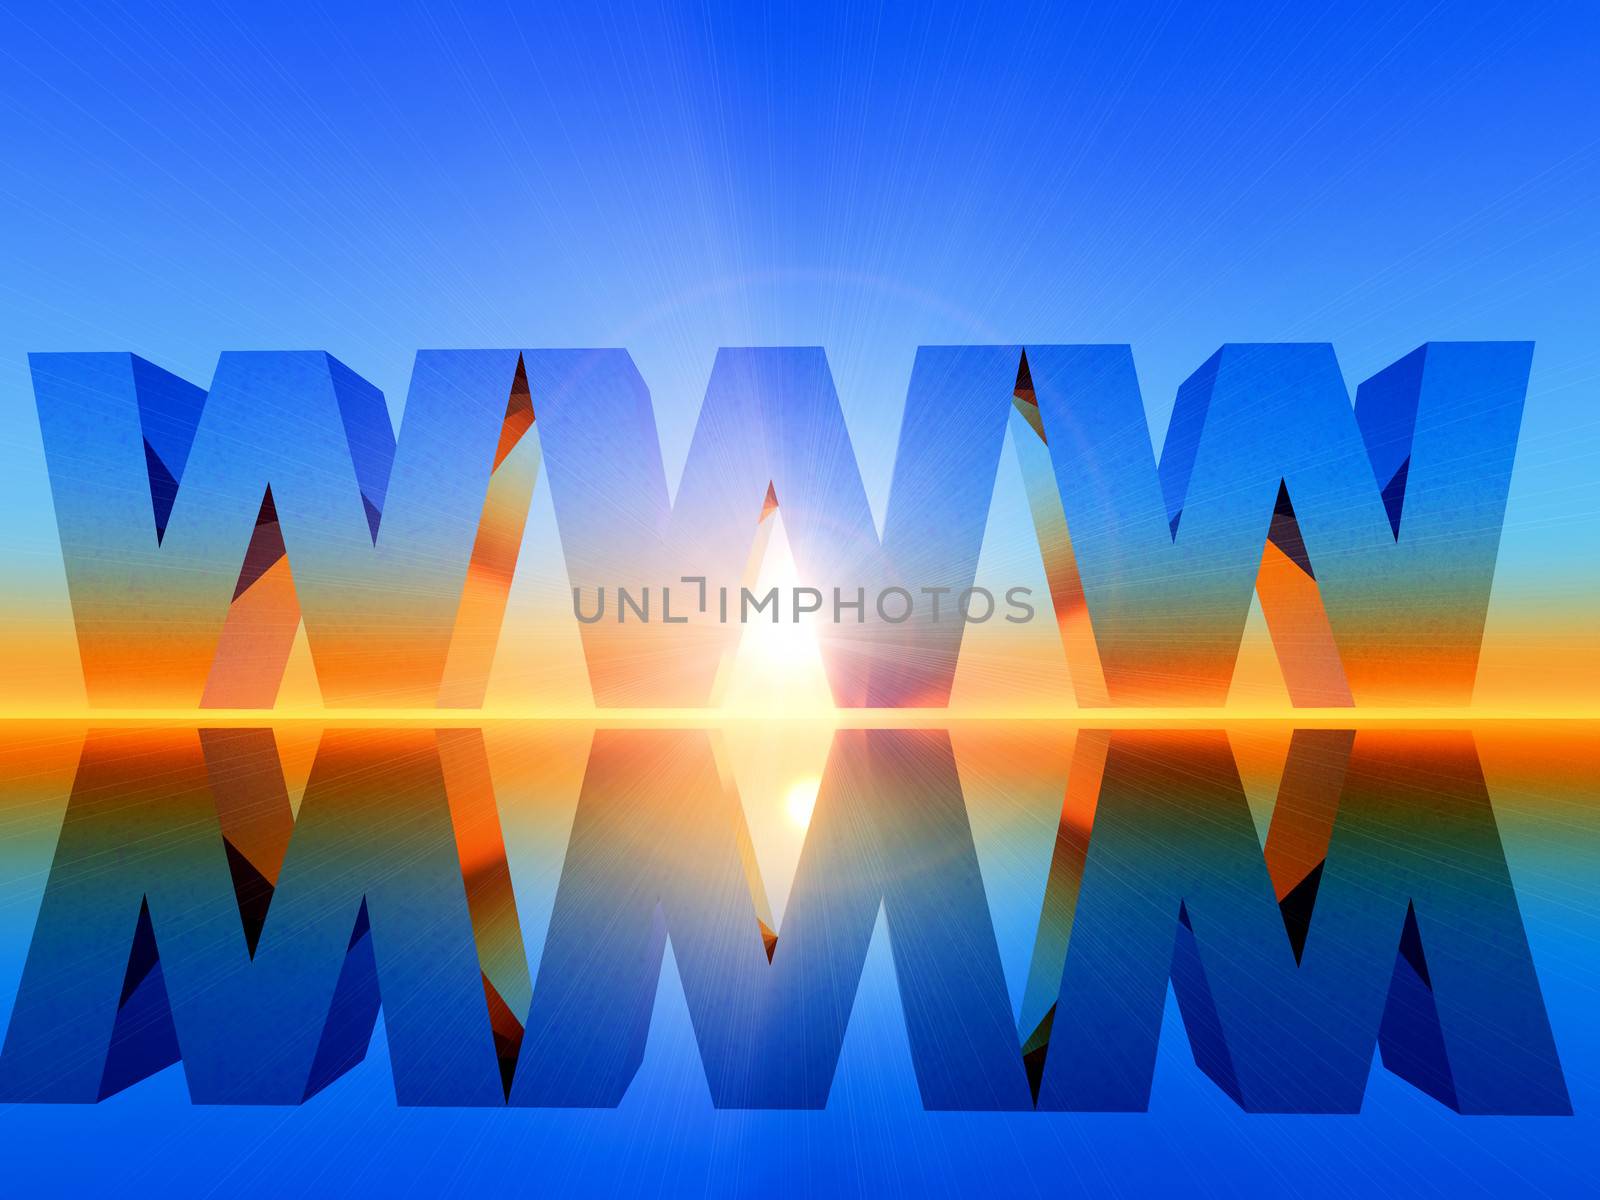 WWW in 3d letters on sunset background